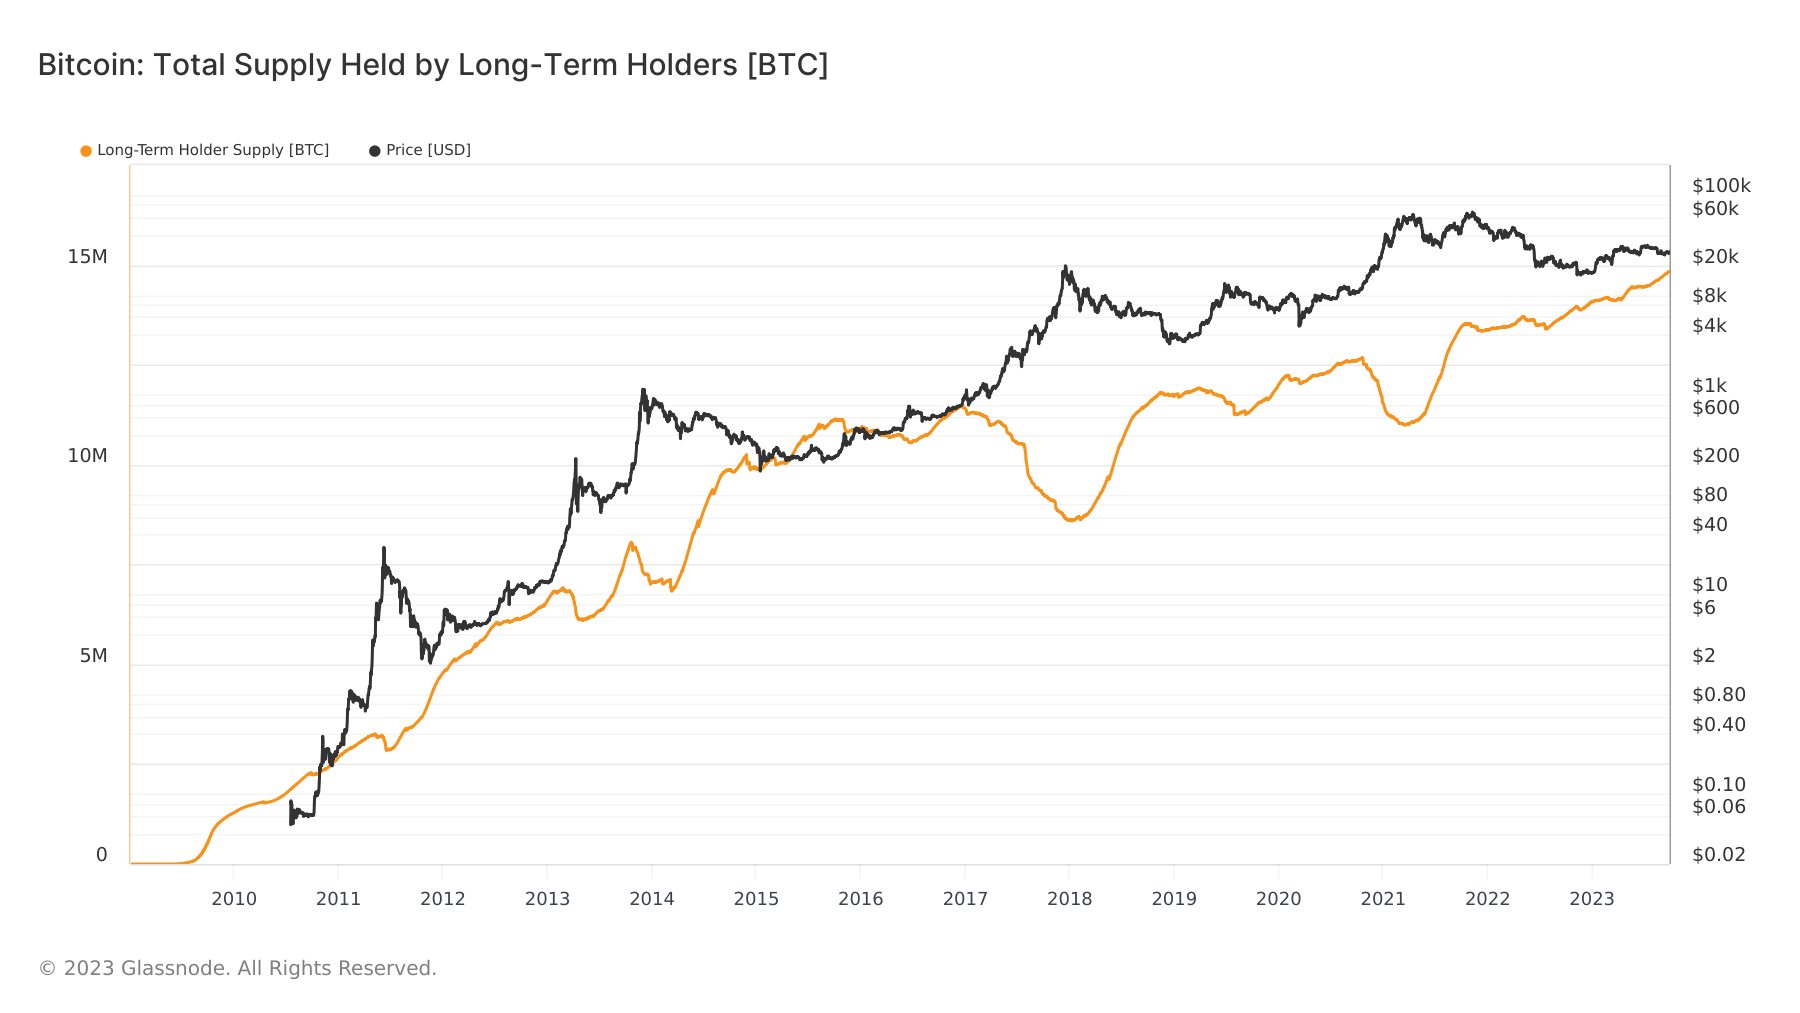 long-term holders supply all time